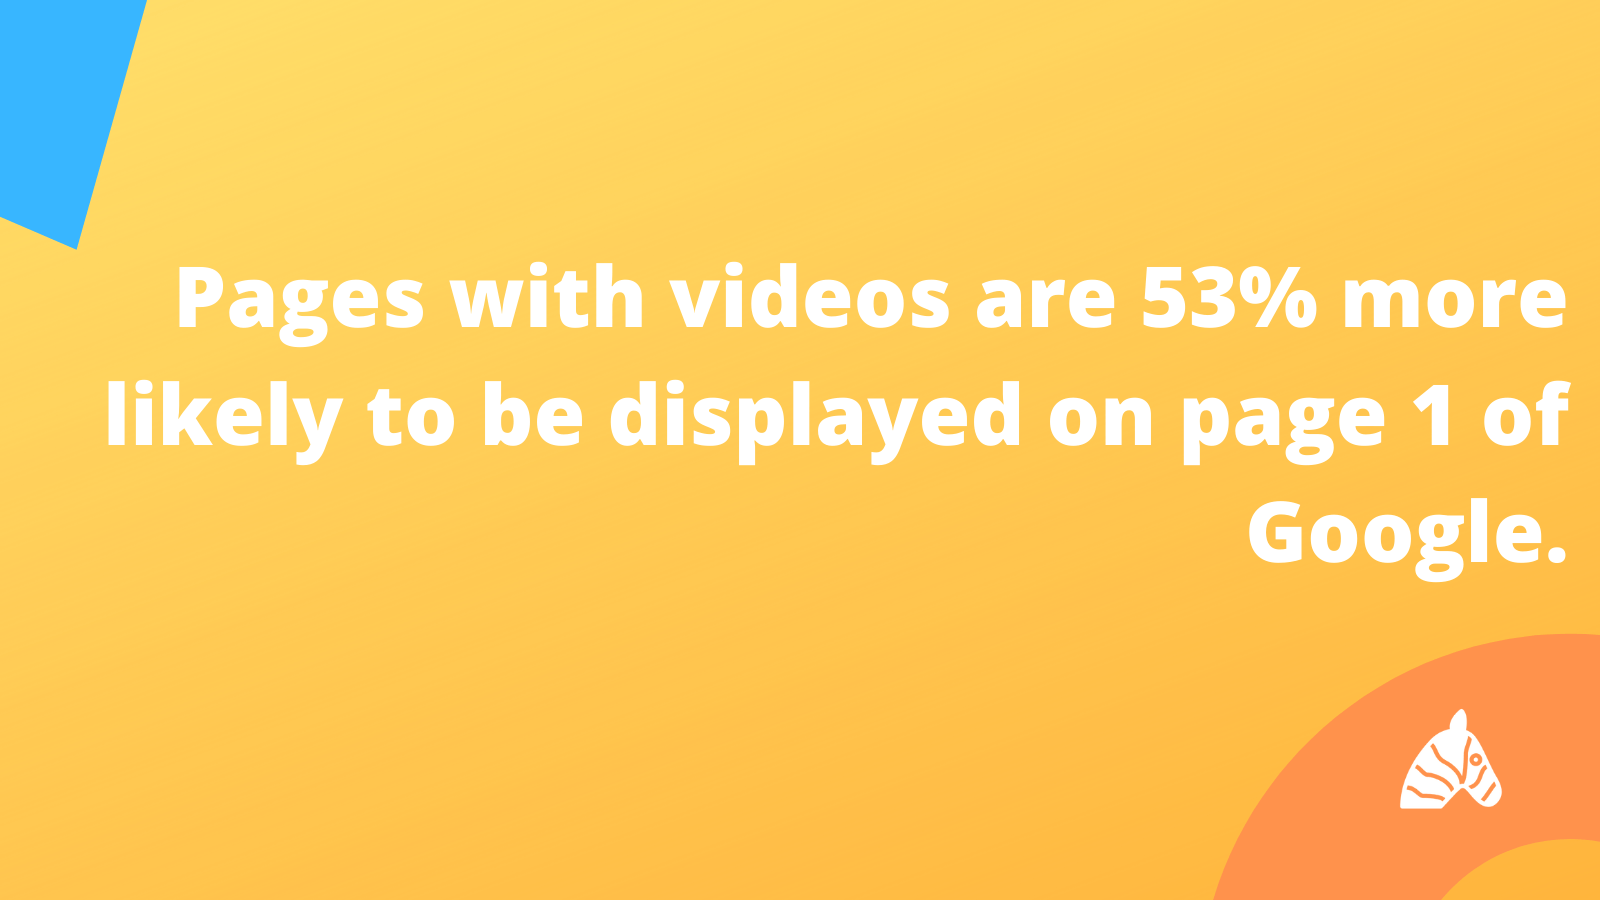 pages with videos are 53% more likely to displayed on page 1 of Google